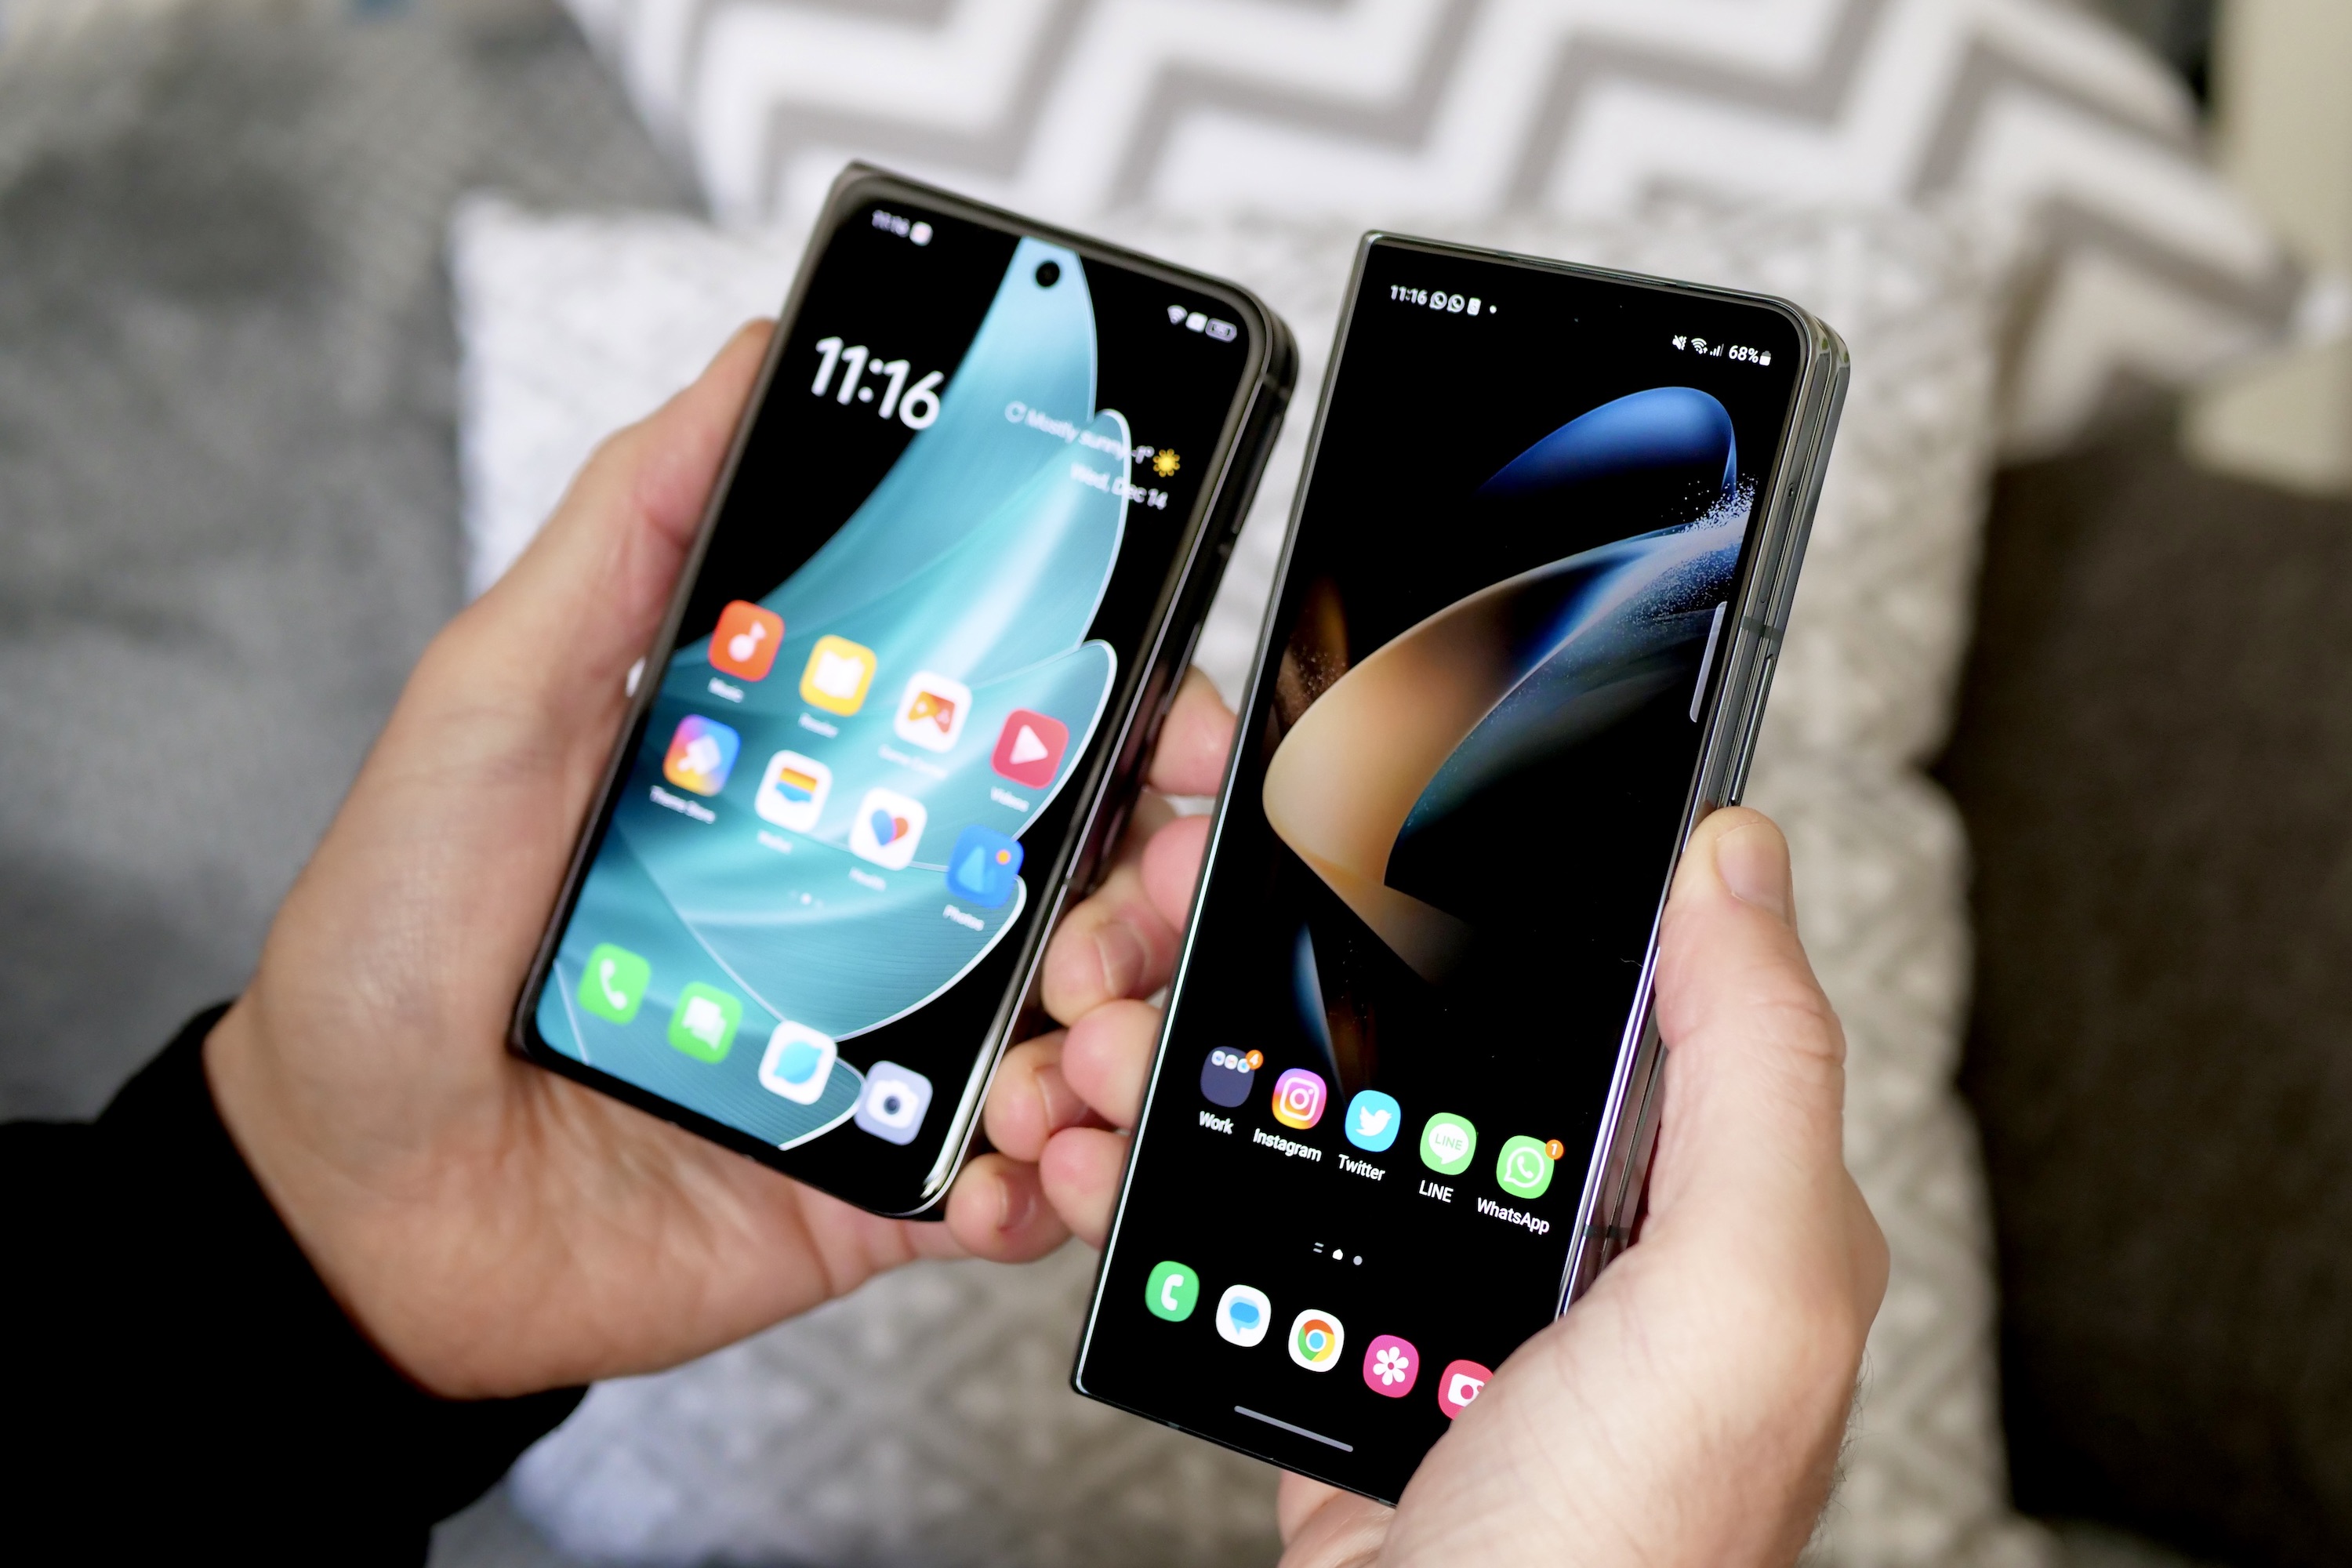 Samsung Galaxy Z Fold 4 review: The functional foldable is a